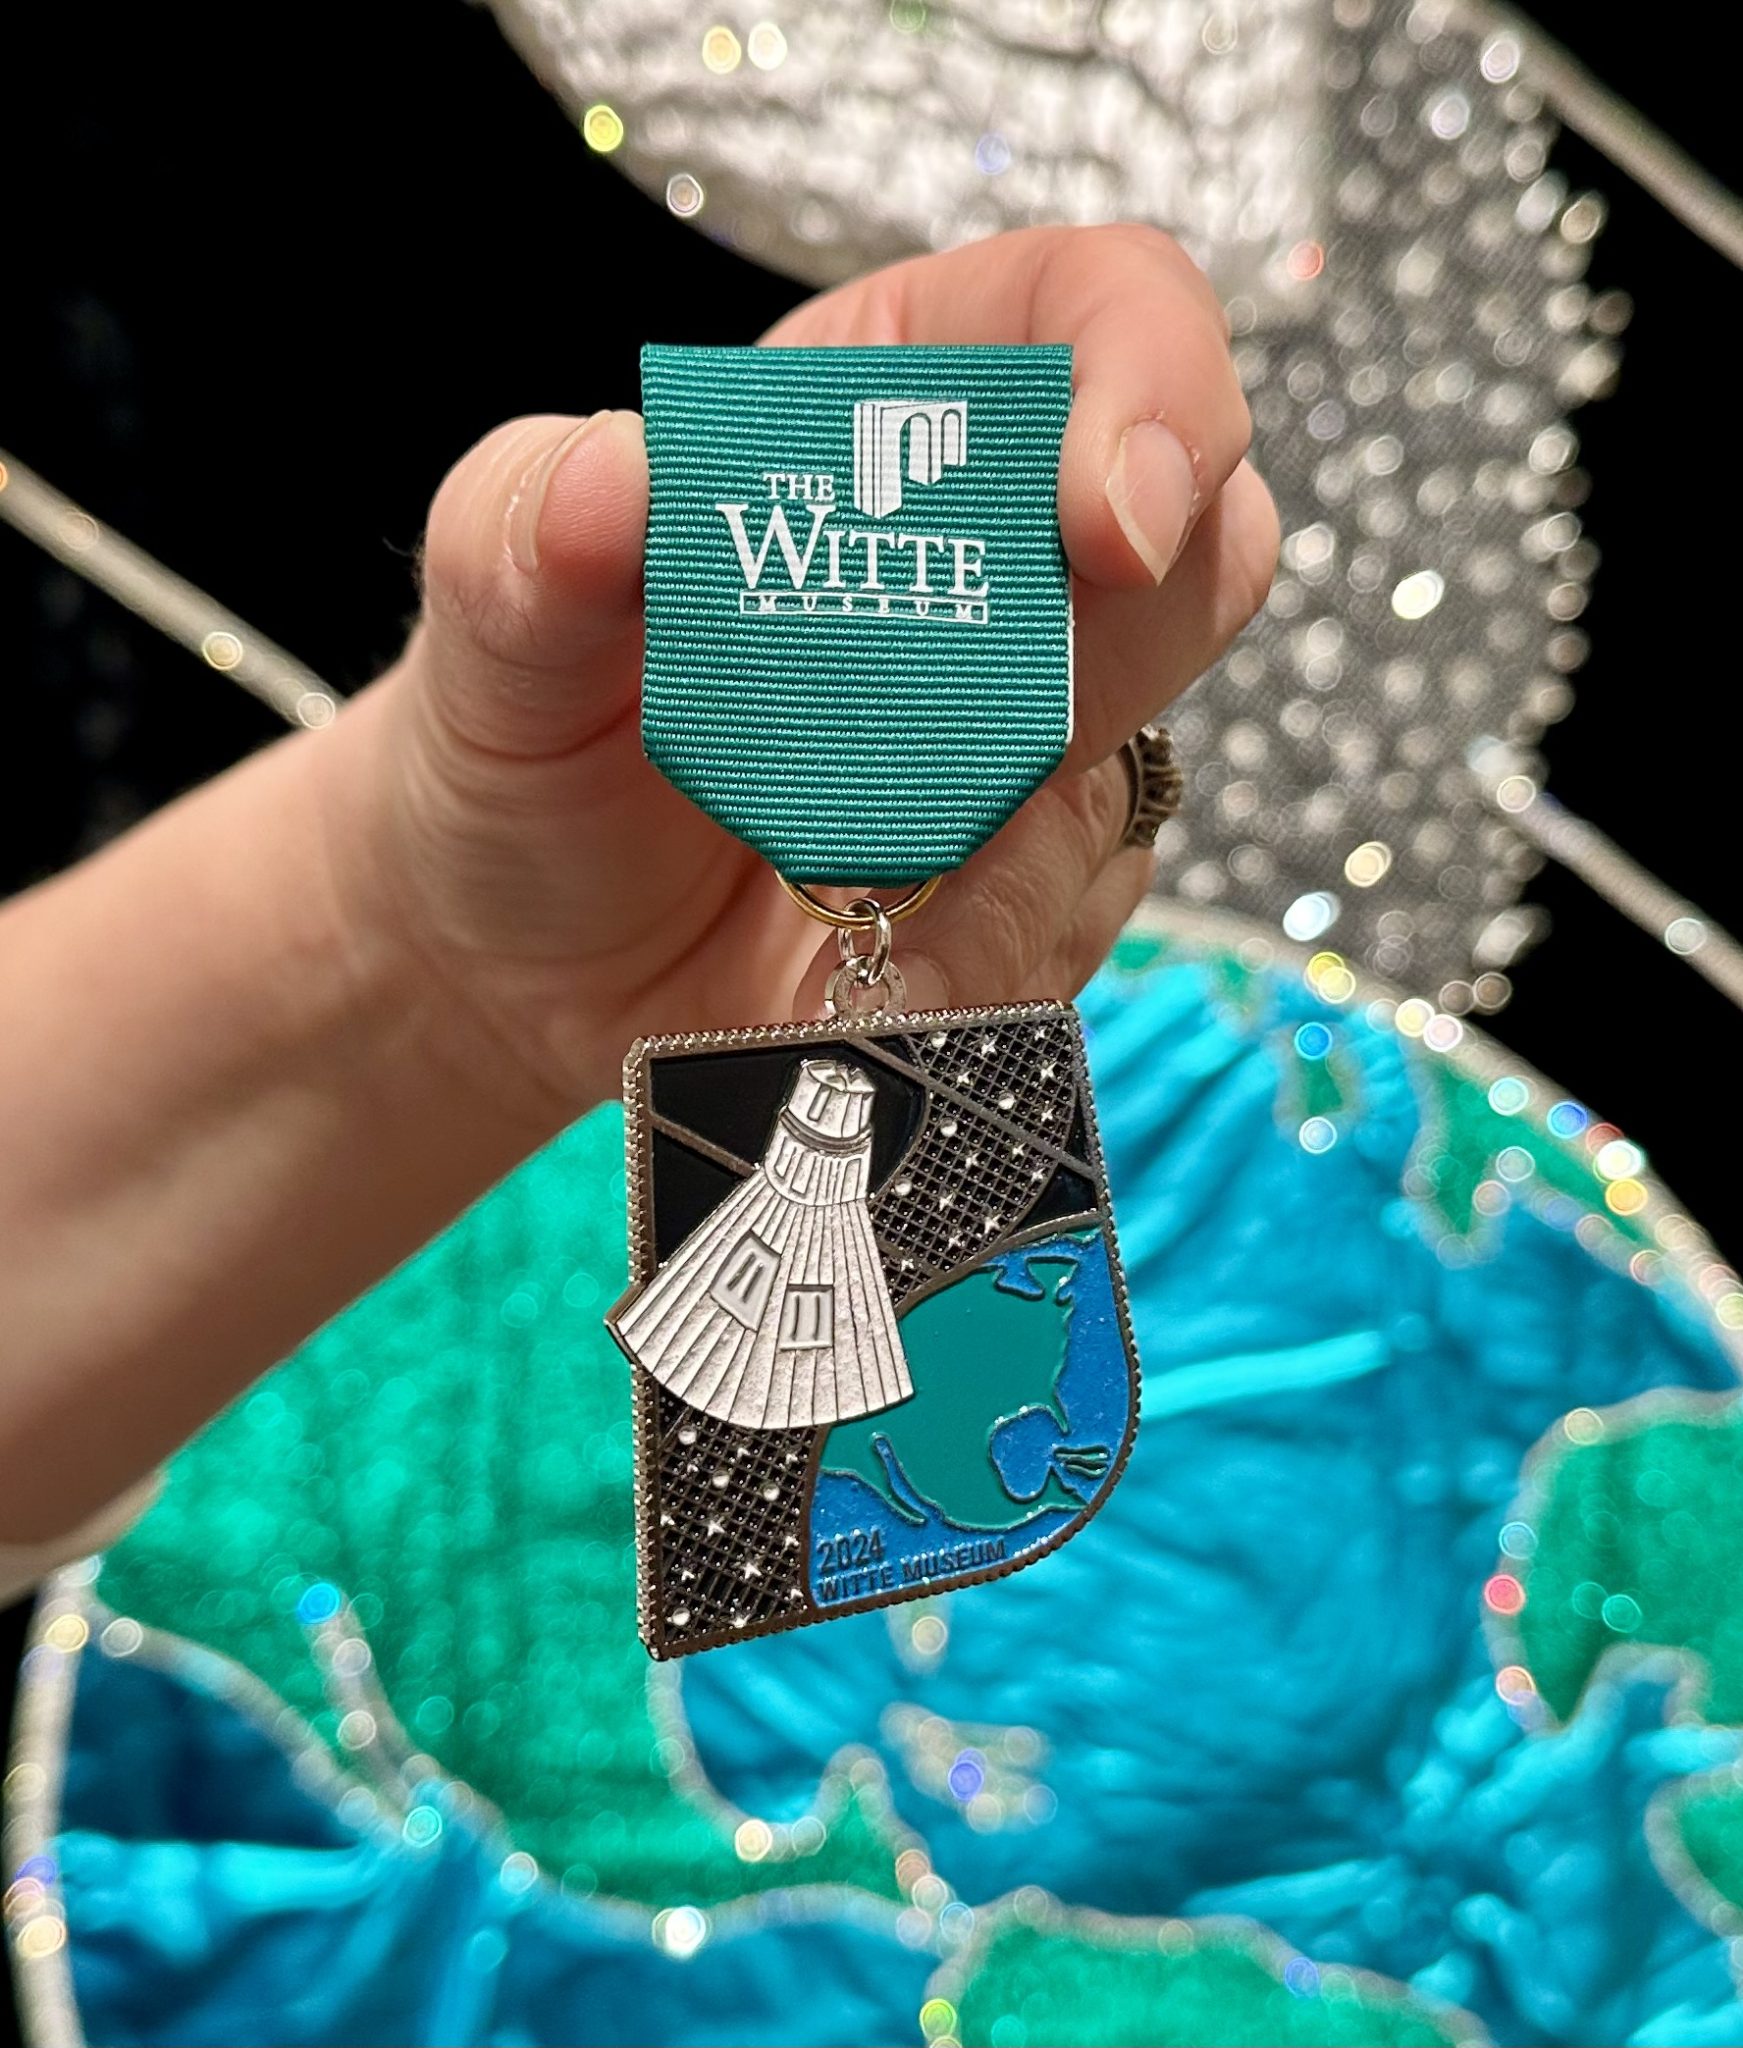 Black, white, teal and green Fiesta medal with space capsule and Earth